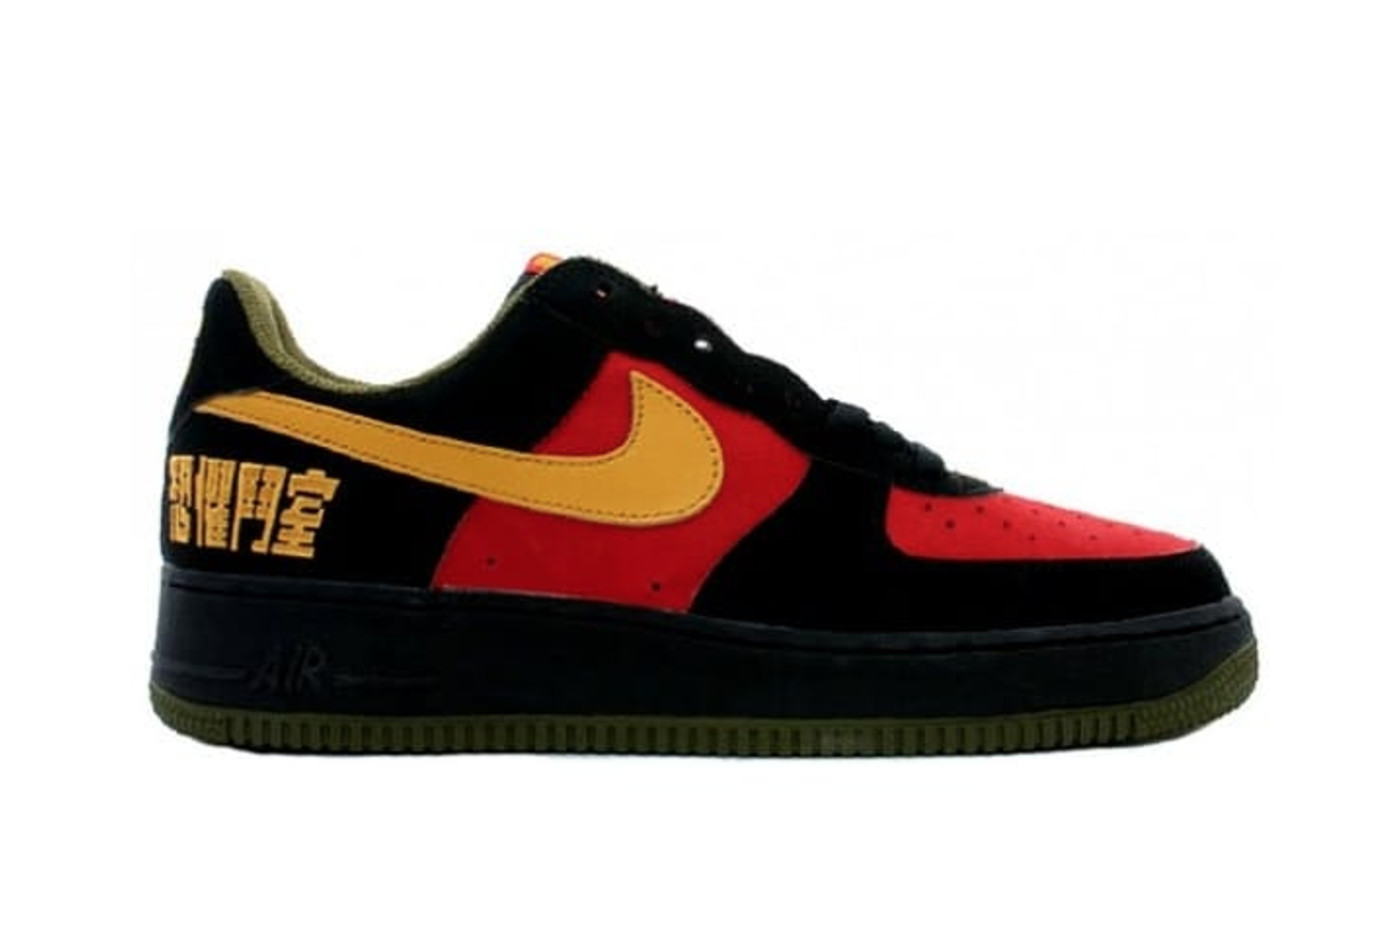 best air forces nike